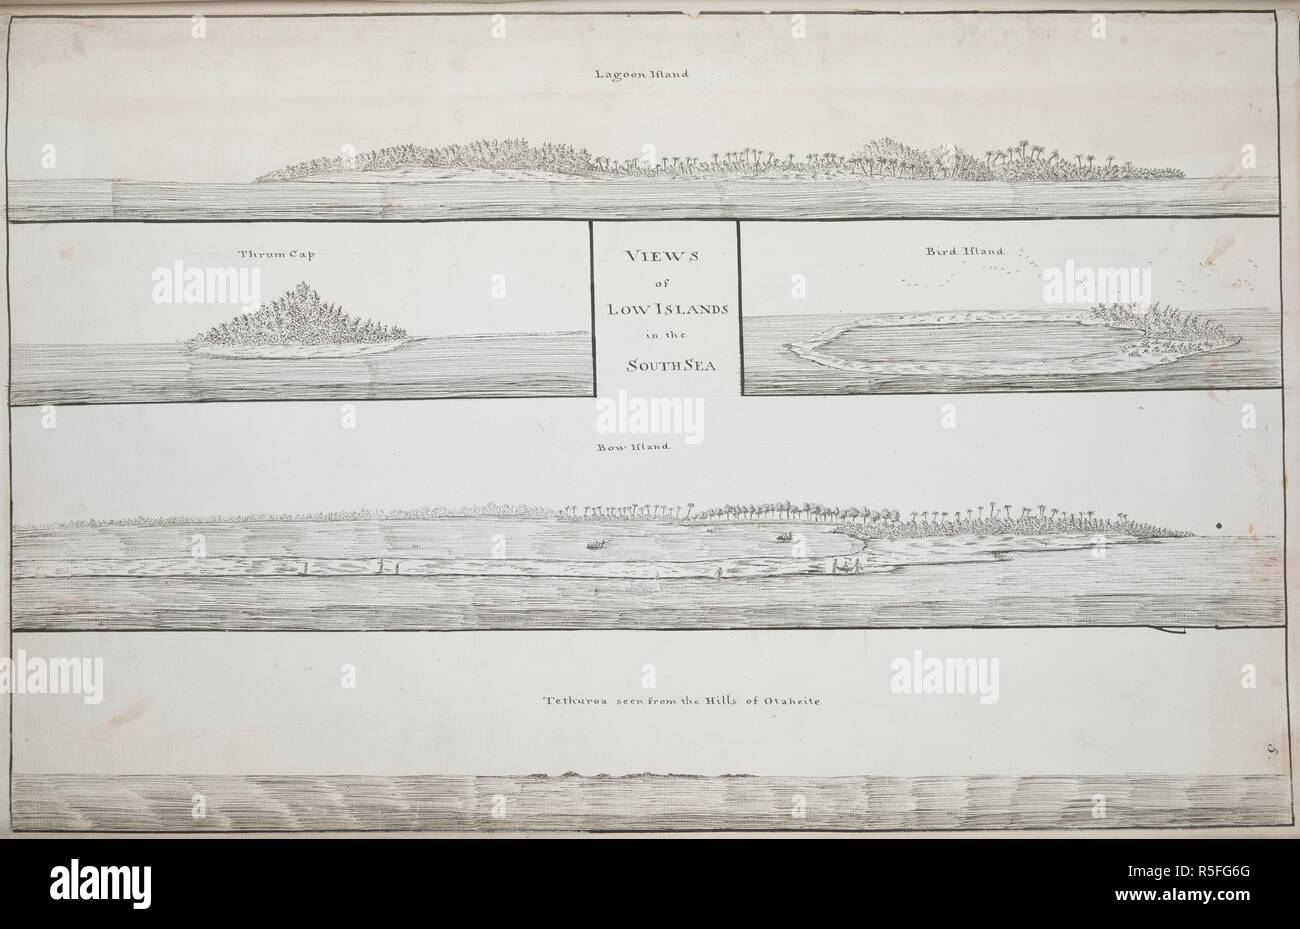 Five small views of Islands in the South Seas, viz.:-- Lagoon Island, Thrum Cap, Bird Island, Bow Island, and Tethuroa, as seen from the hills of Otaheite; drawn by Lieut. James Cook, in his first voyage, 1768-1771. Charts, Plans, Views, and Drawings taken on board the Endeavour during Captain Cook's First Voyage, 1768-1771. 1768-1771. Source: Add. 7085, No.5. Stock Photo